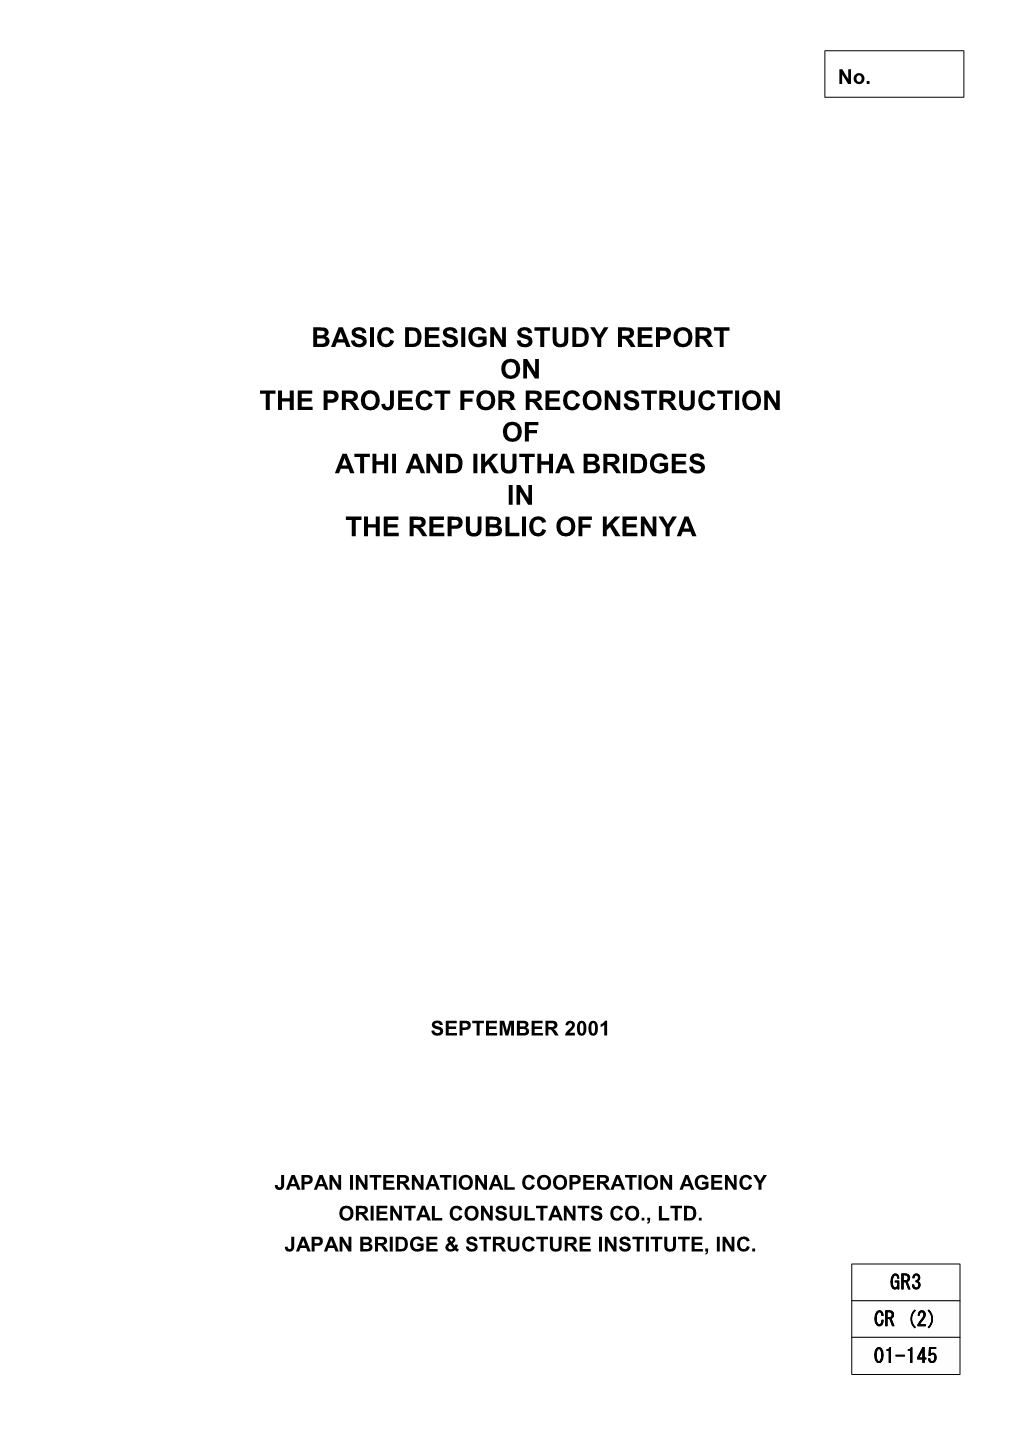 Basic Design Study Report on the Project for Reconstruction of Athi and Ikutha Bridges in the Republic of Kenya